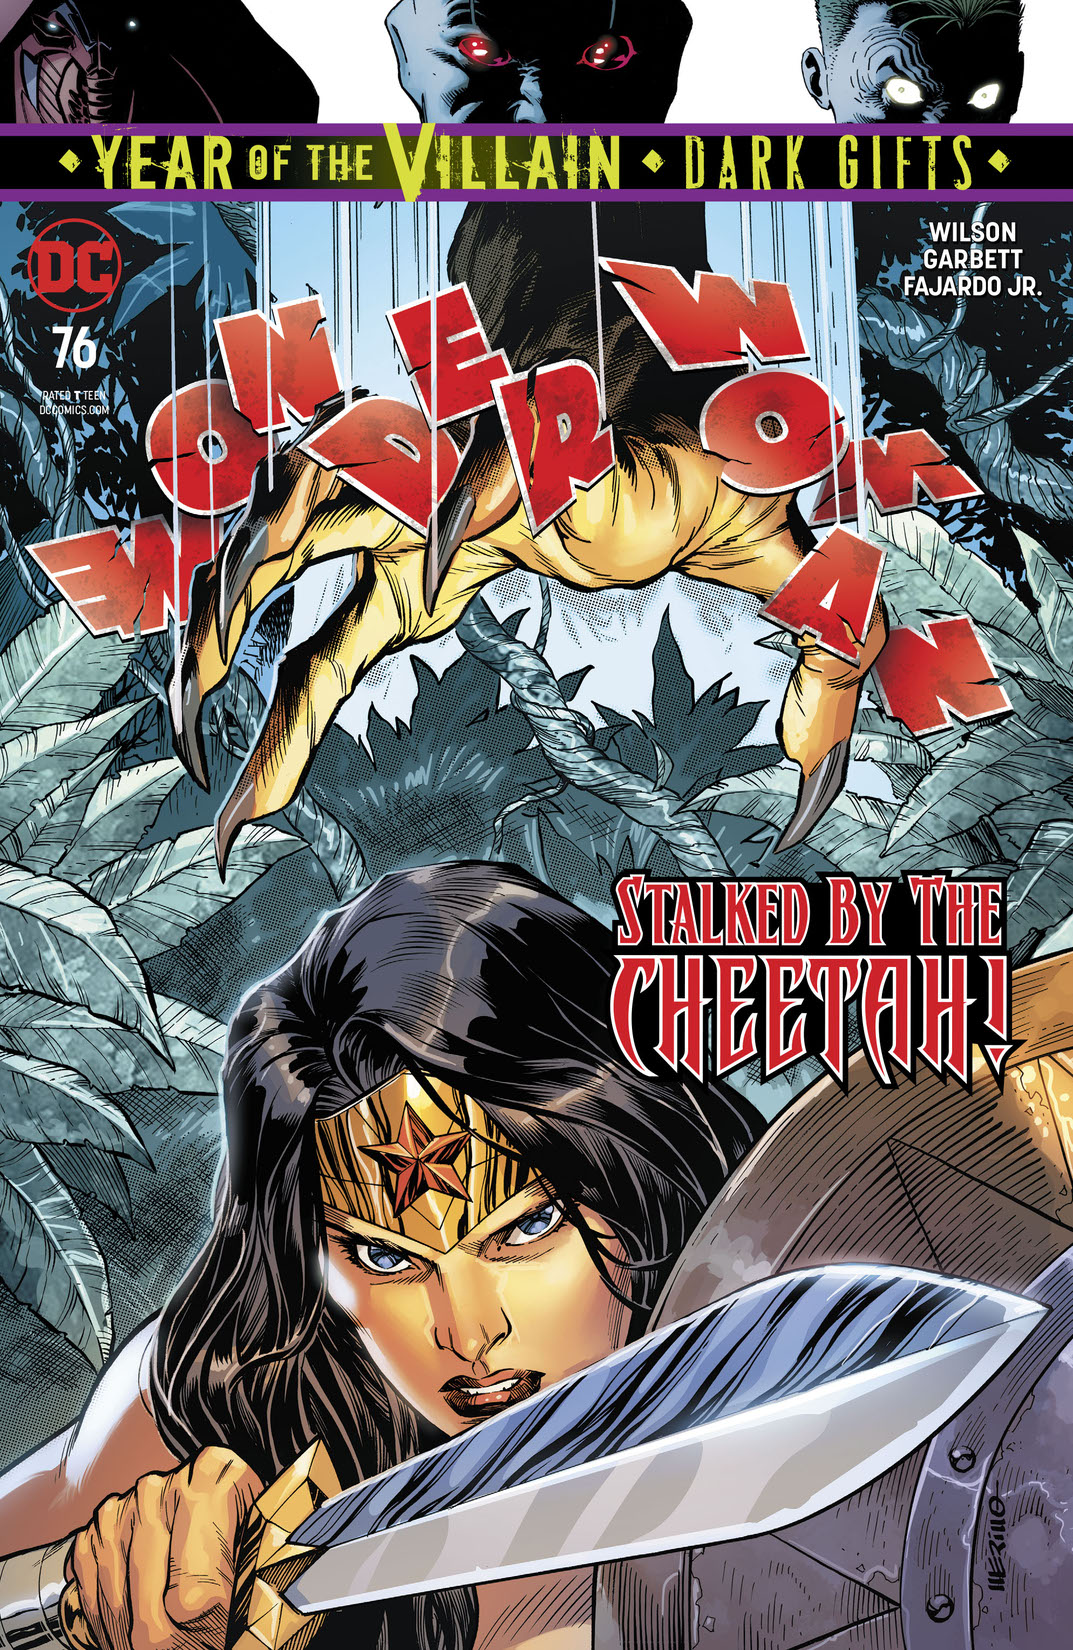 Wonder Woman (2016-) #76 preview images